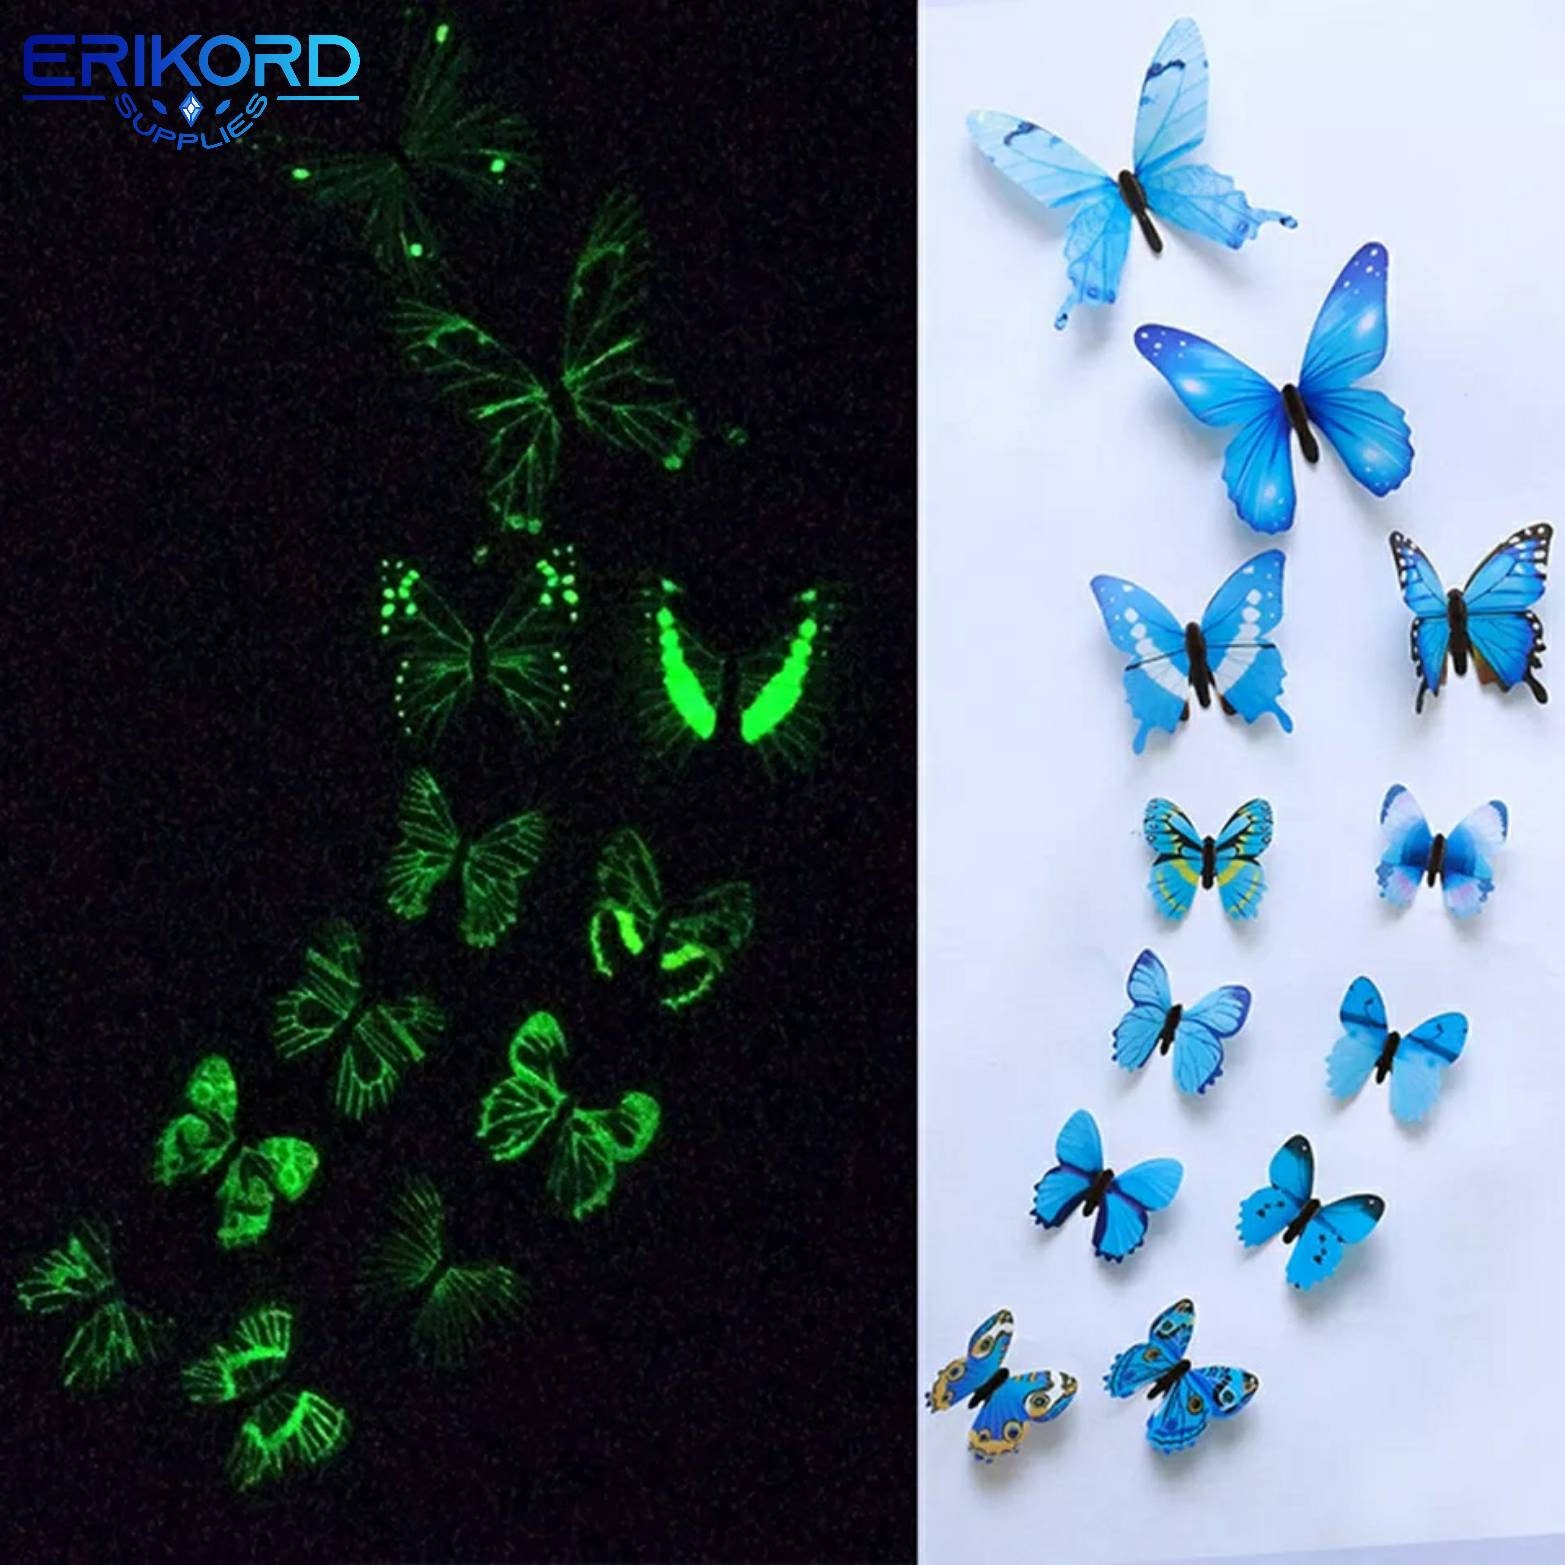 120 Pieces Butterfly Decals Glow Butterfly Stickers India